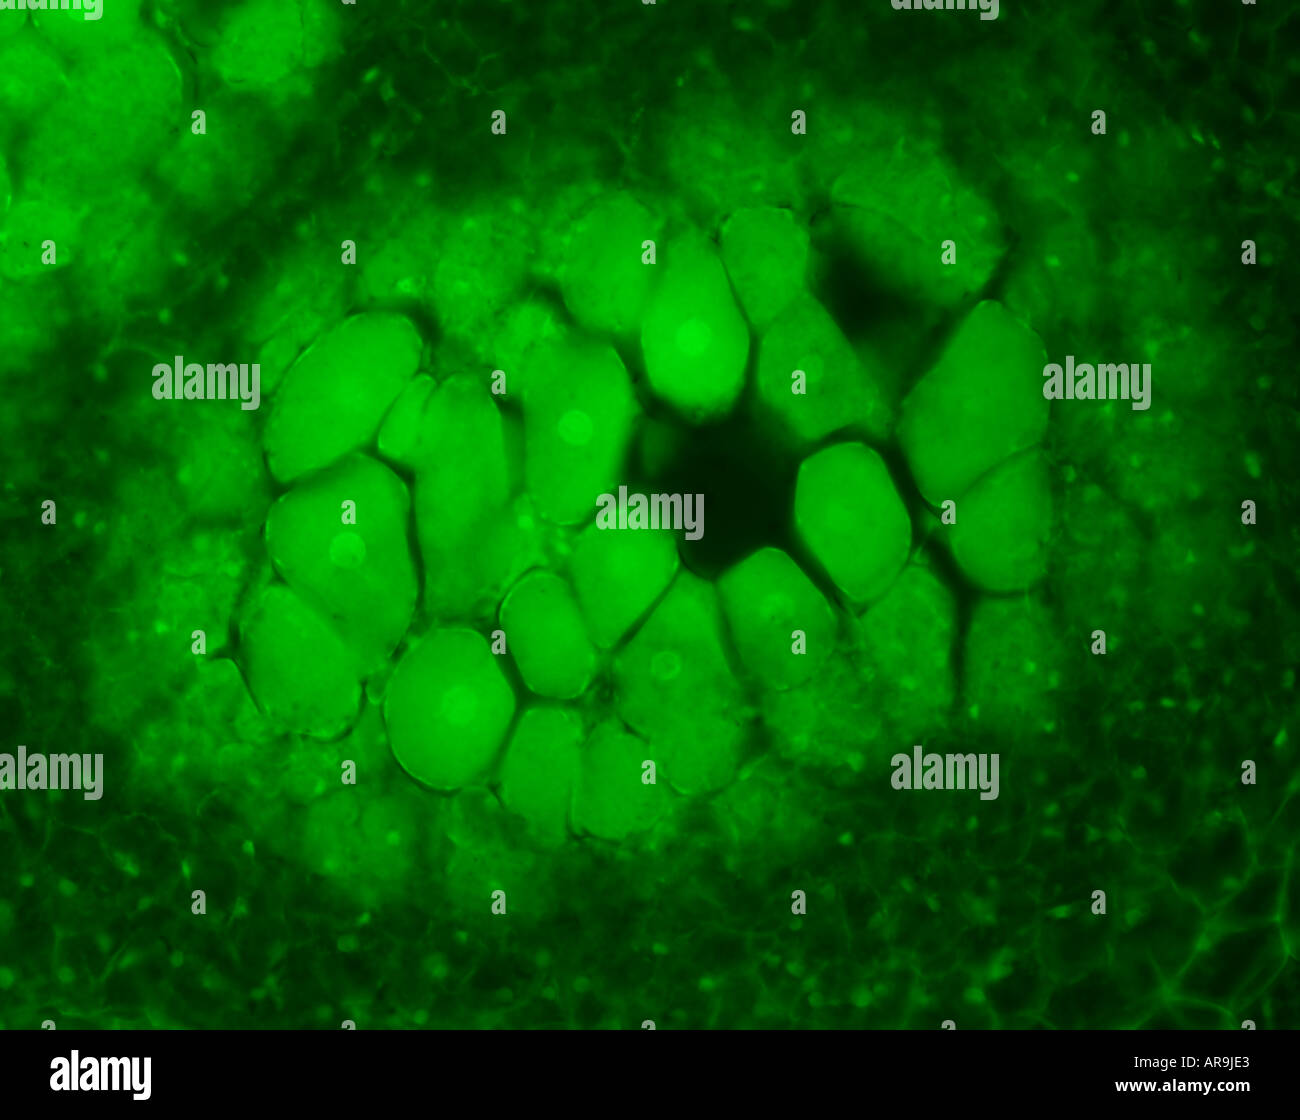 Cell biology groups of different cells working together green Stock Photo